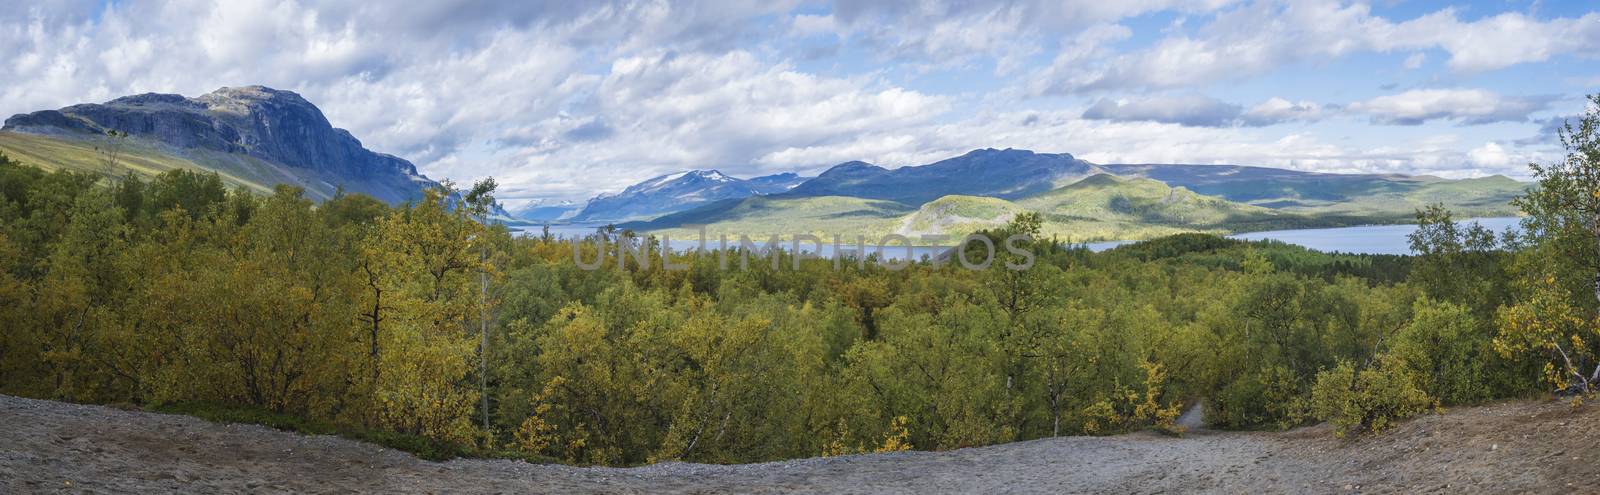 Panoramic landscape with beautiful river Lulealven, snow capped mountain and yellow birch tree. Kungsleden hiking trail near Saltoluokta, north of Sweden, Lapland wild nature. Early autumn blue sky by Henkeova